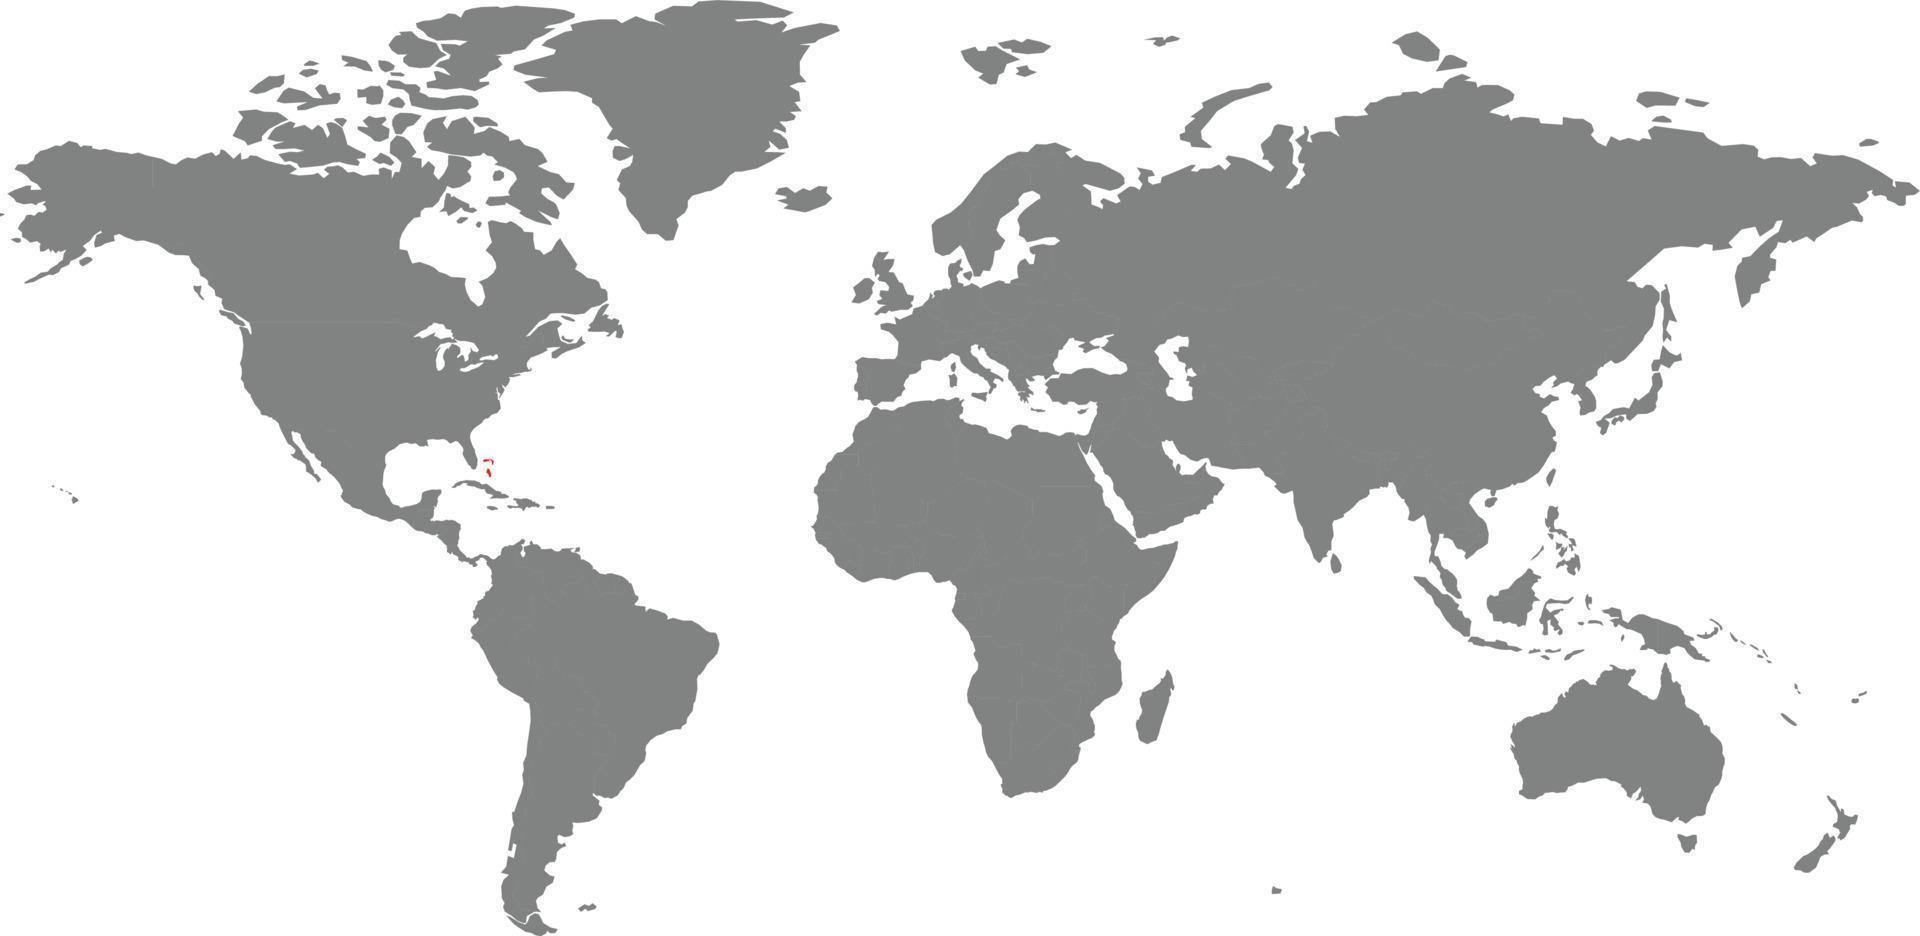 Bahamas map on the world map vector